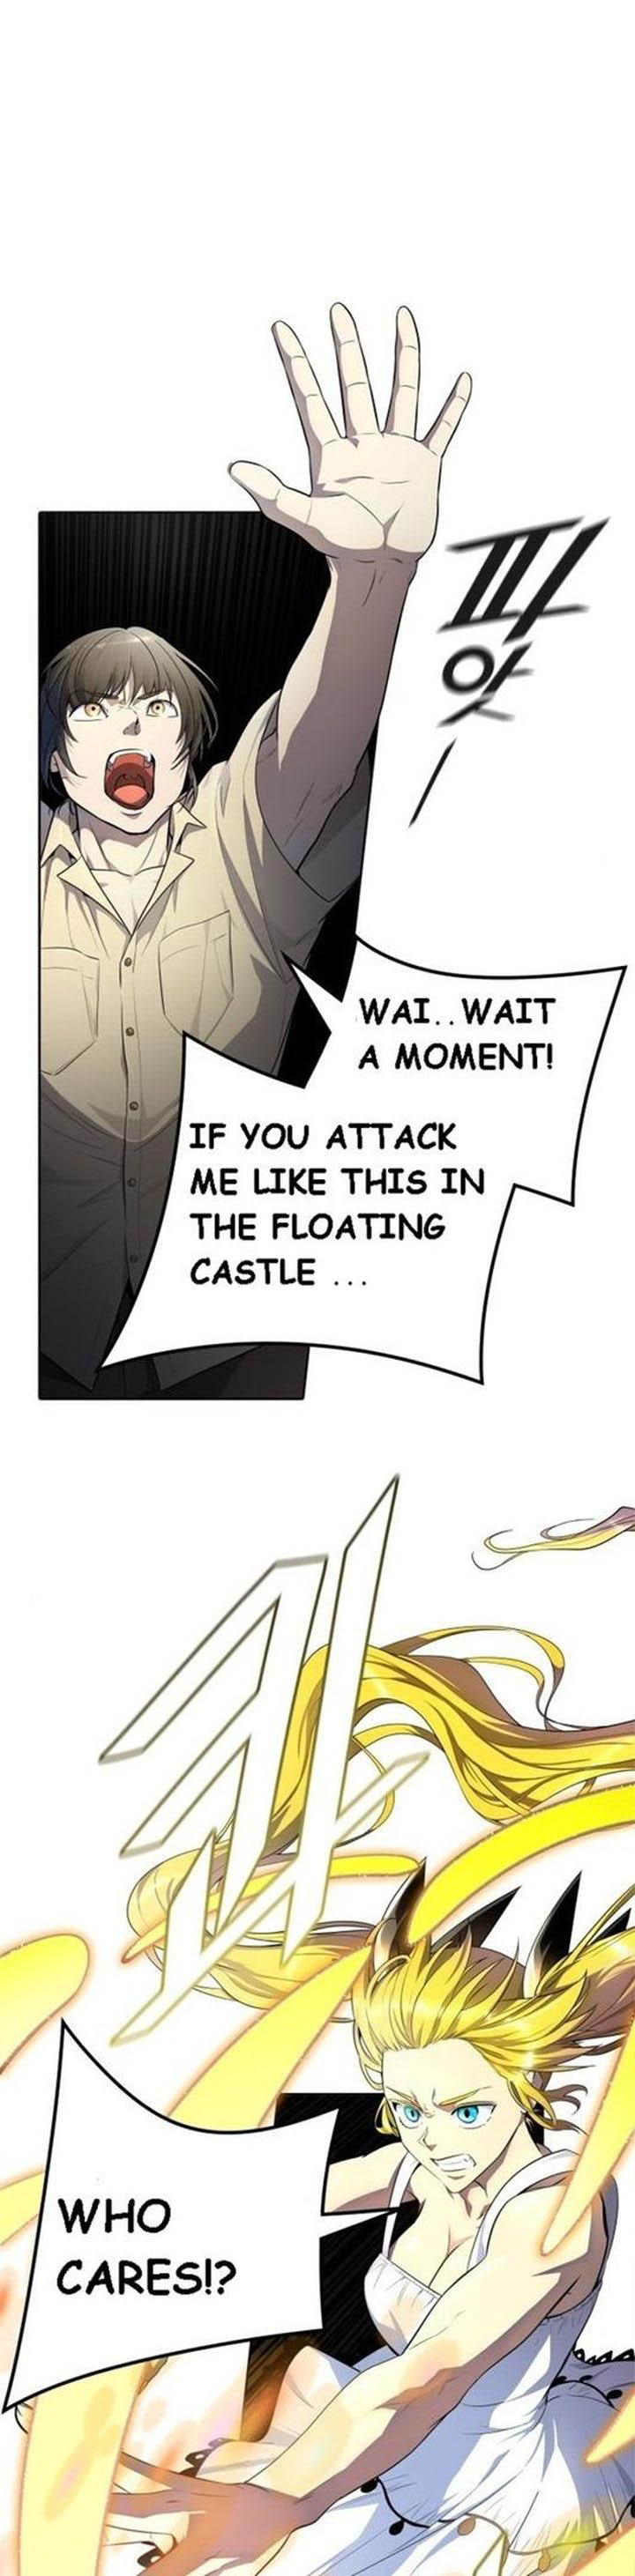 Tower Of God 548 13